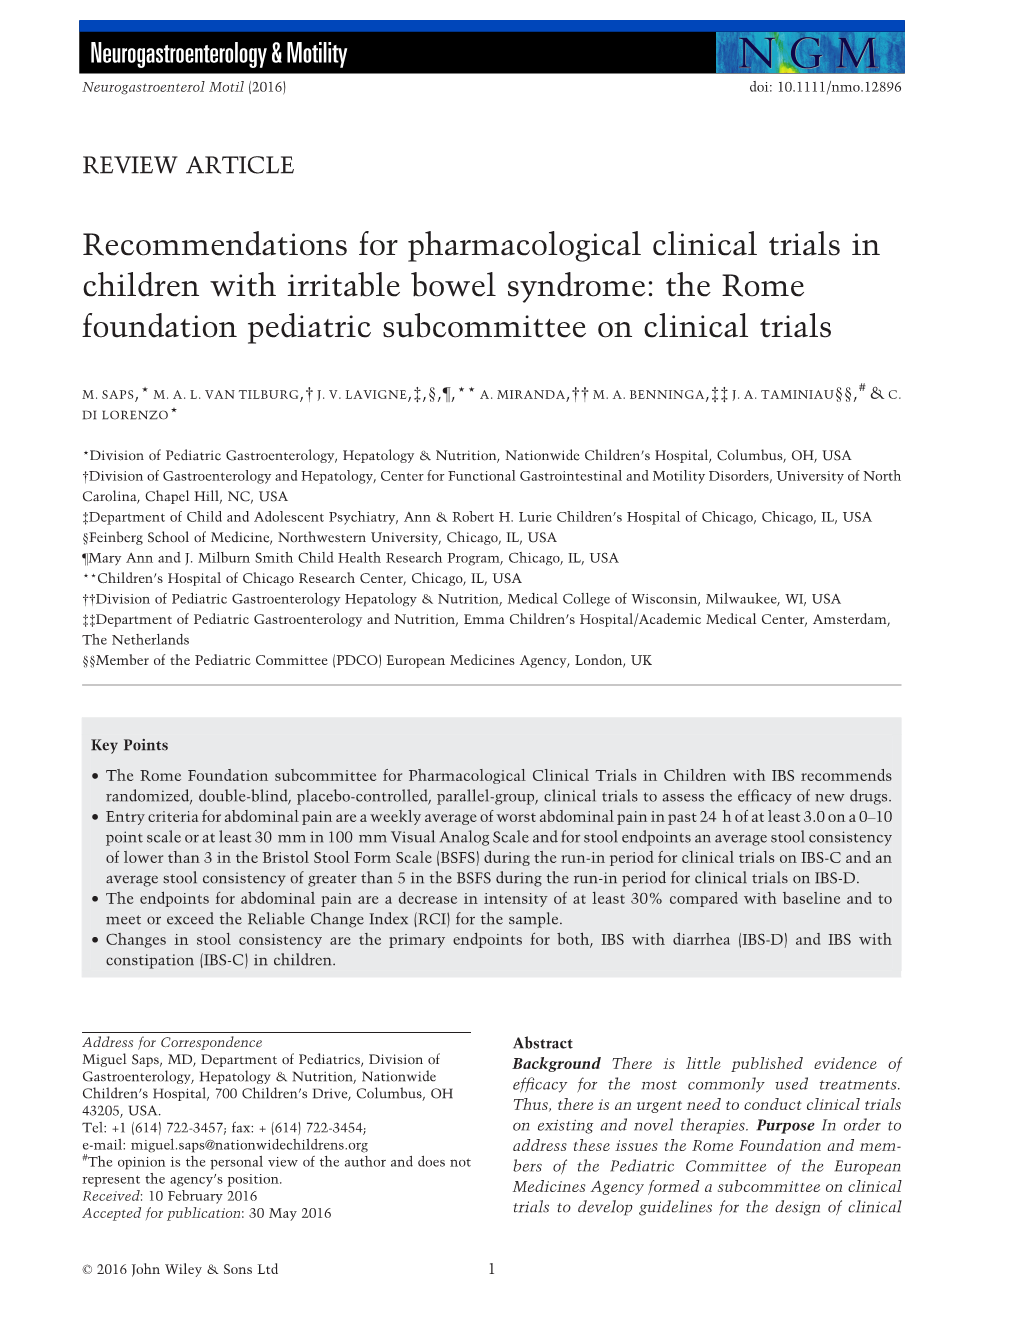 Recommendations for Pharmacological Clinical Trials in Children with Irritable Bowel Syndrome: the Rome Foundation Pediatric Subcommittee on Clinical Trials